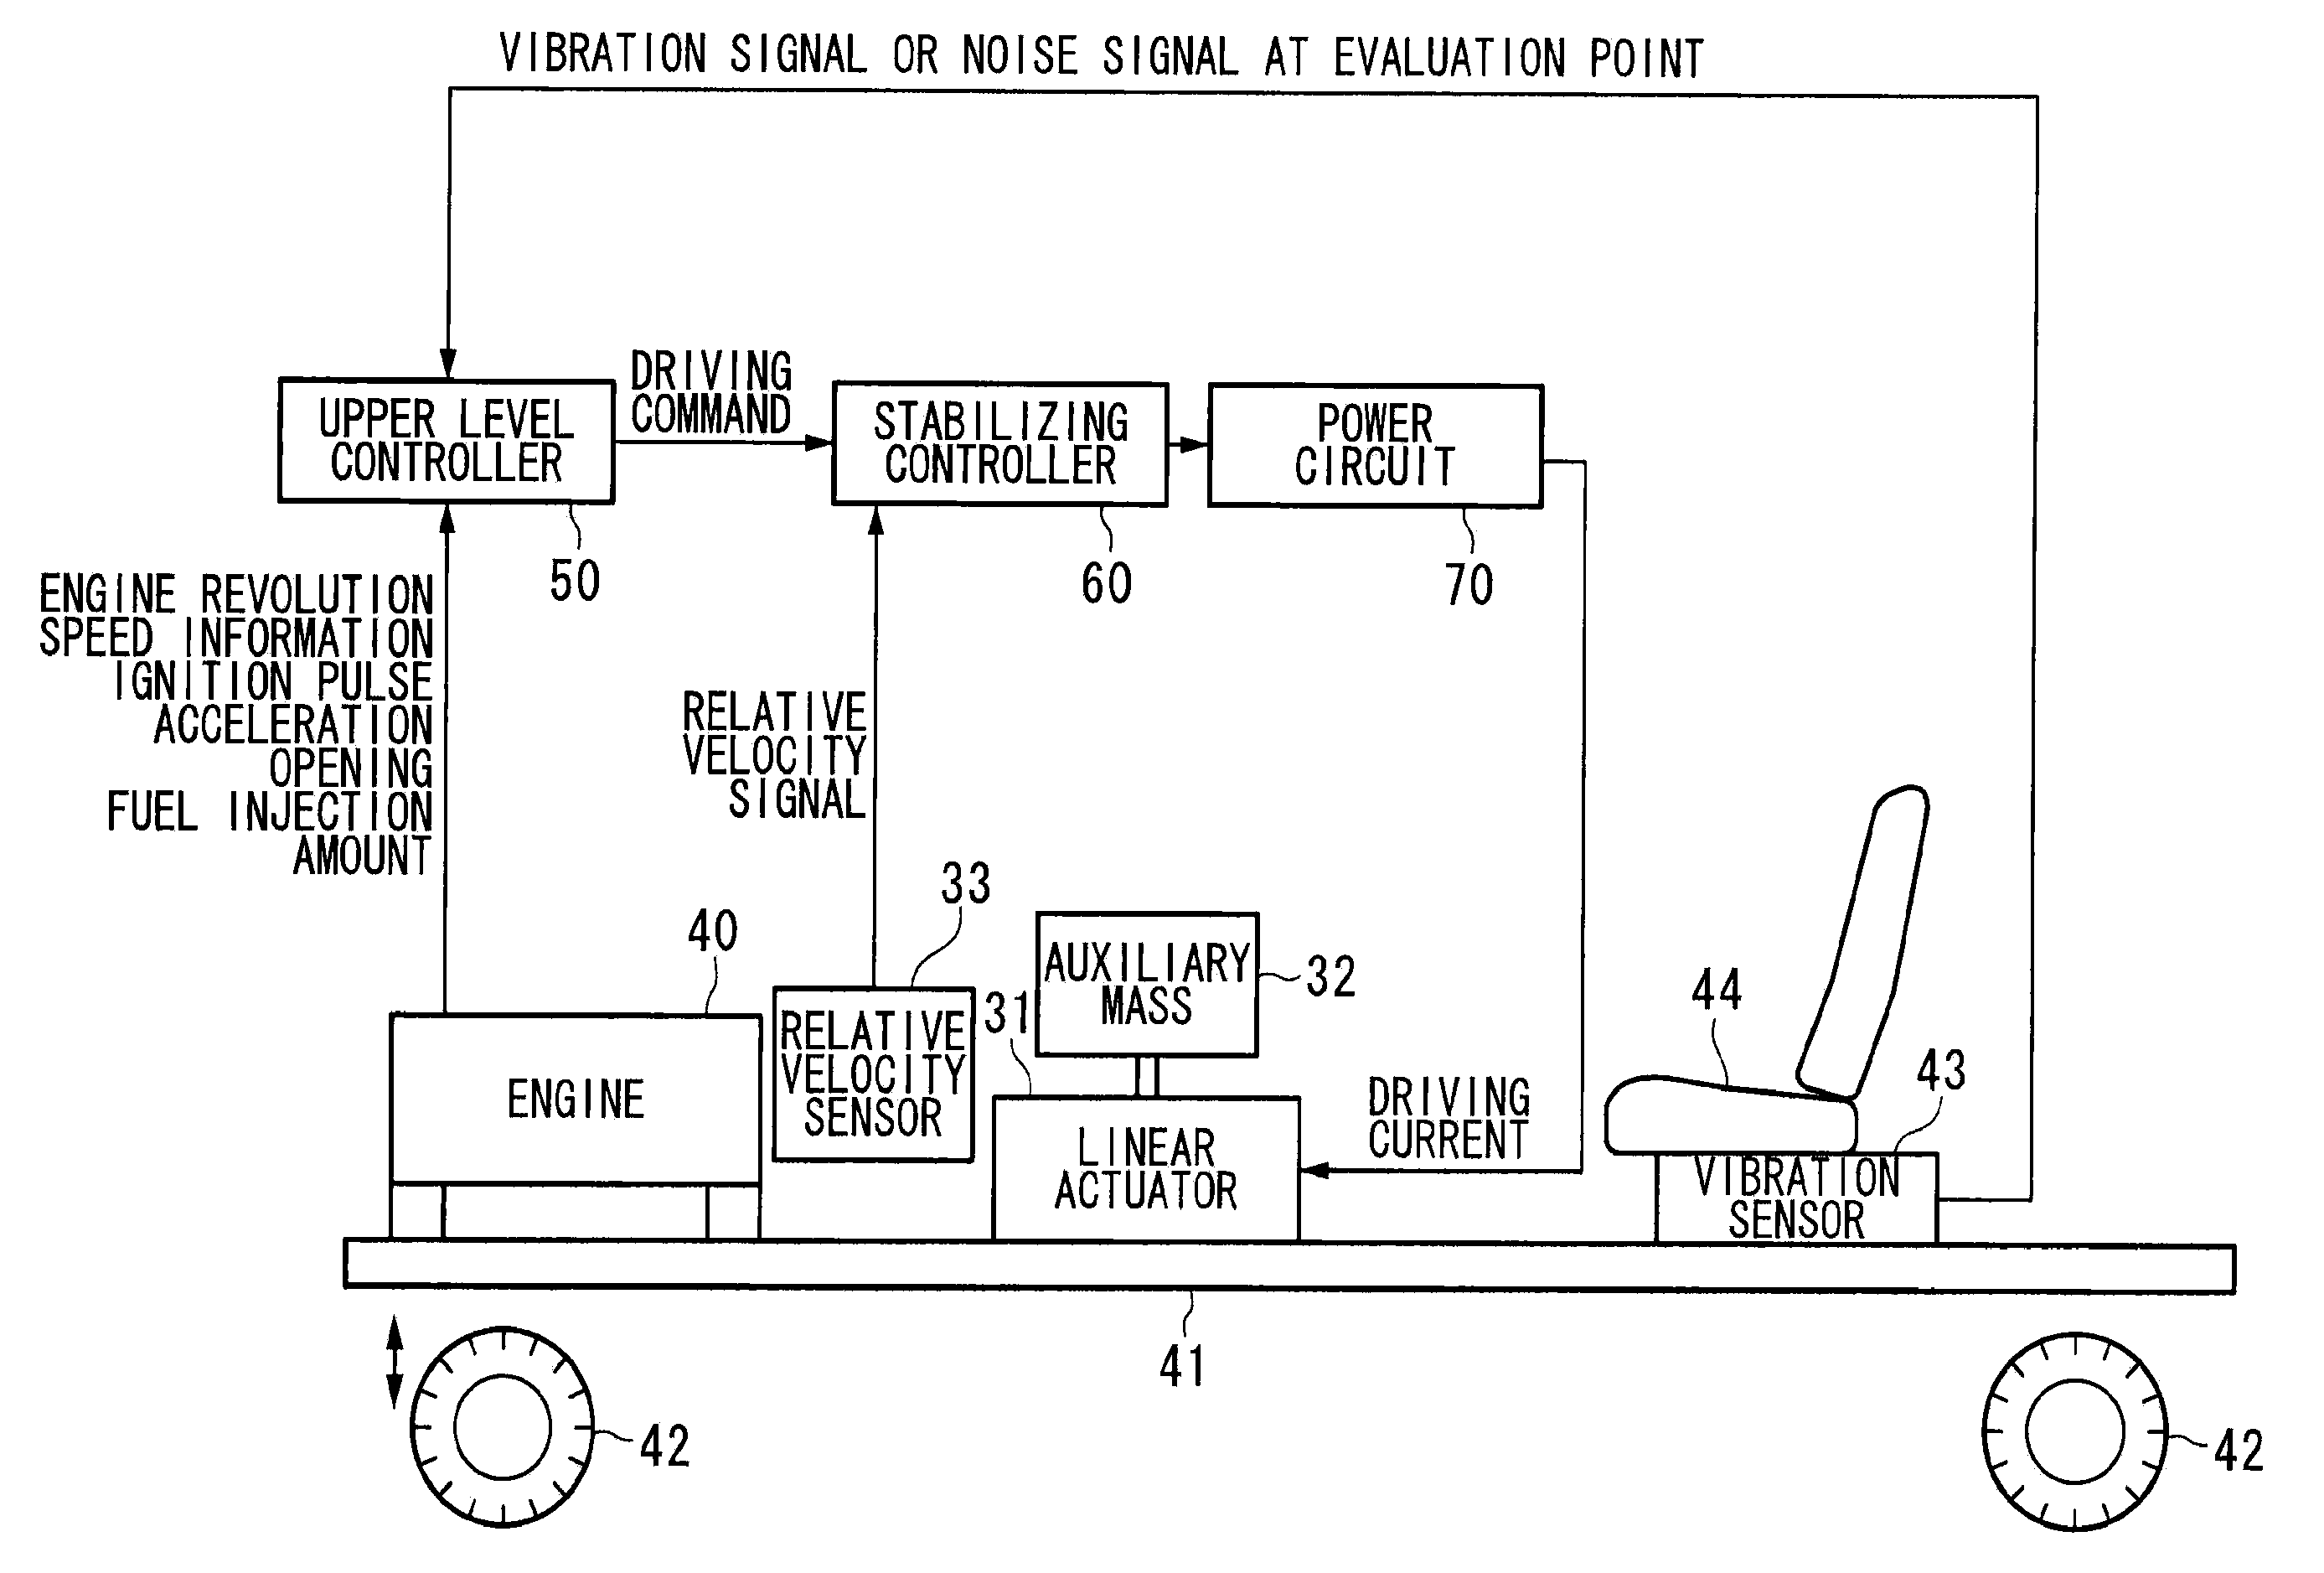 Damping apparatus for reducing vibration of automobile body